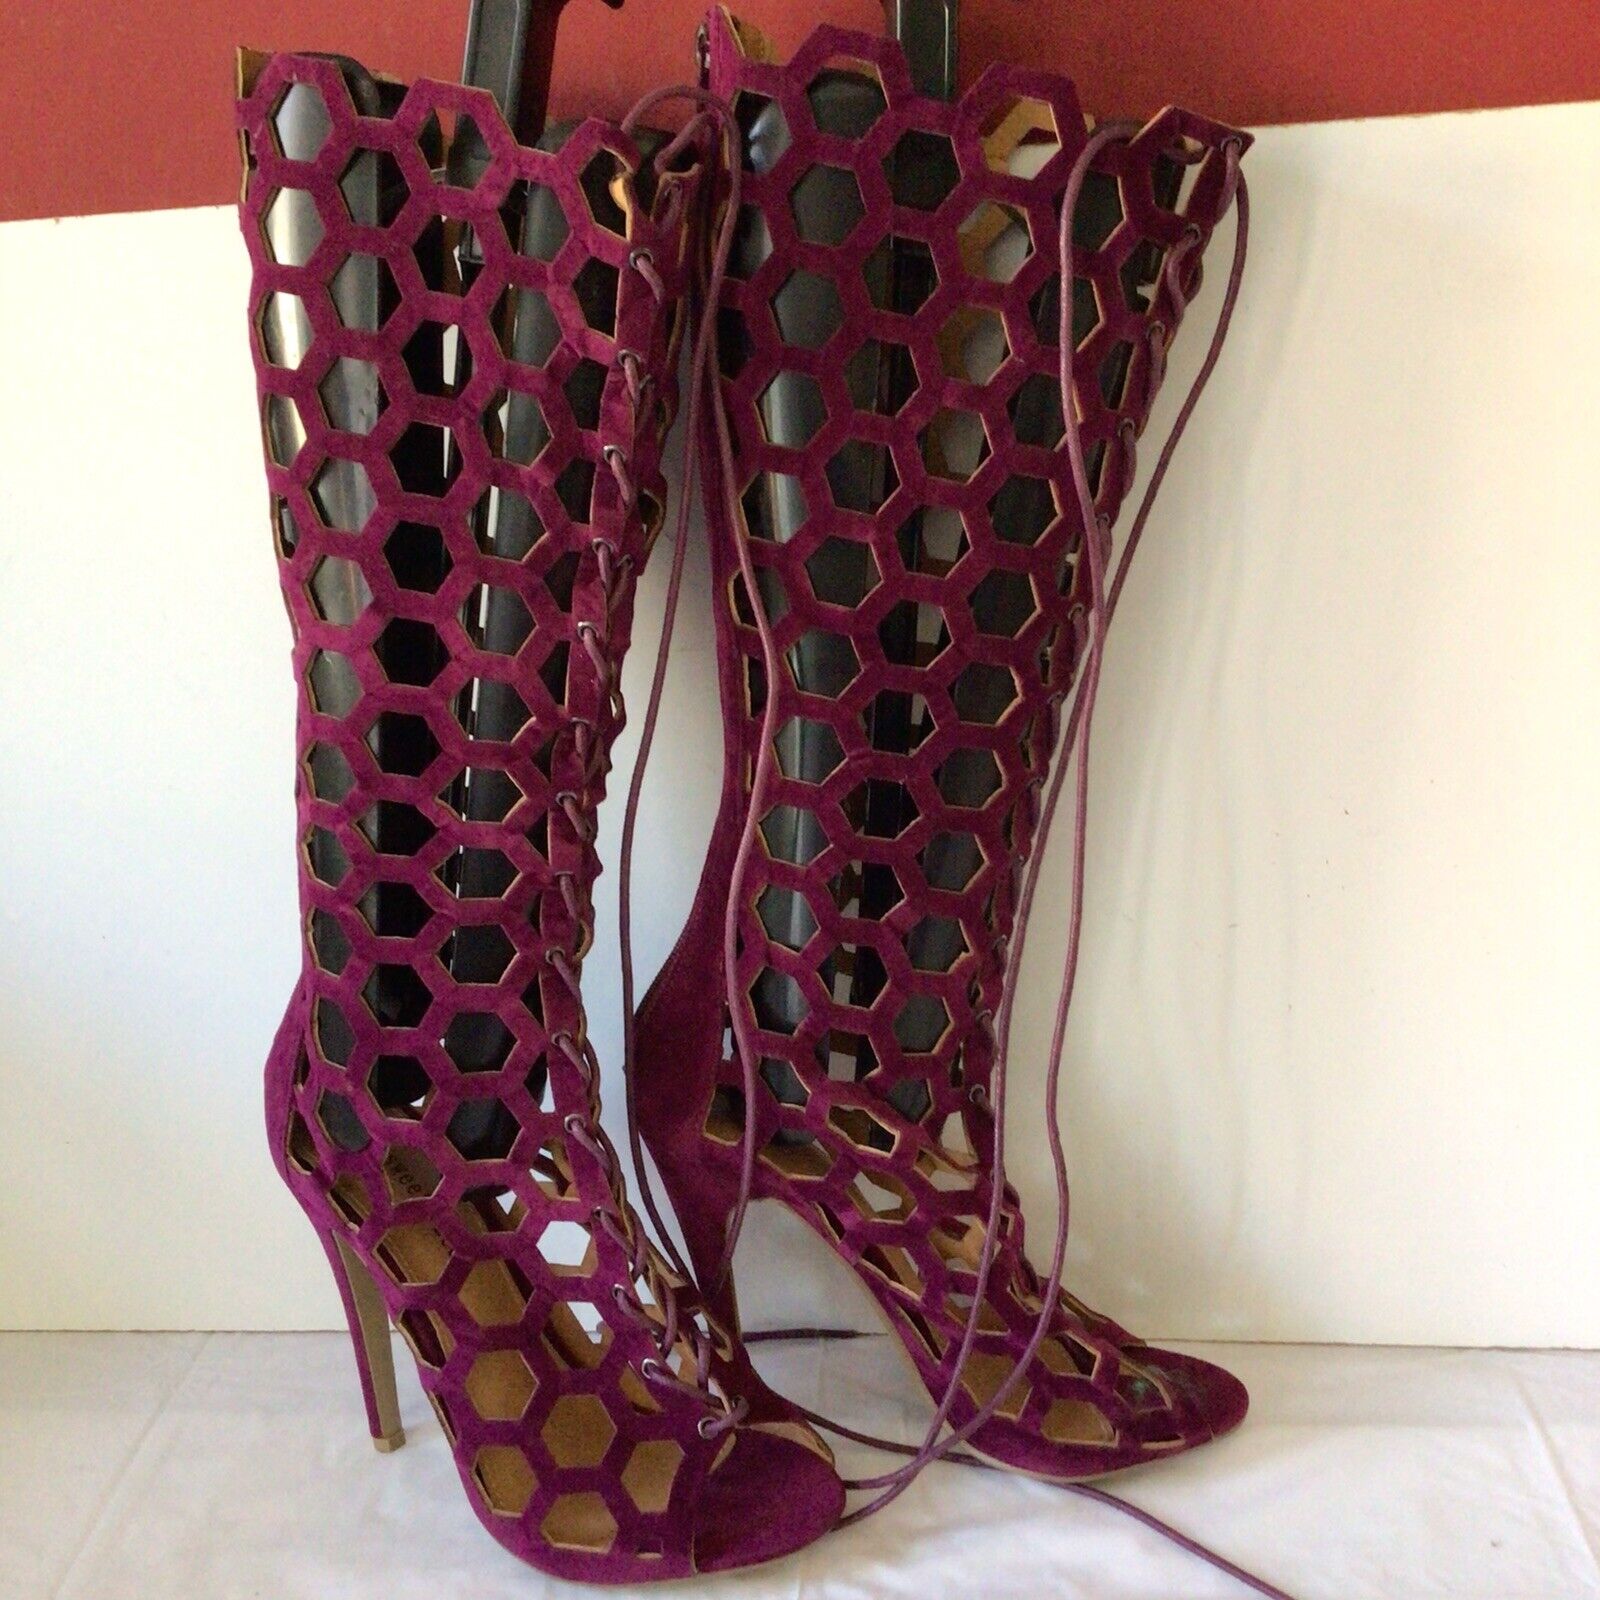 ahmed riyaz recommends Knee High Cage Boots